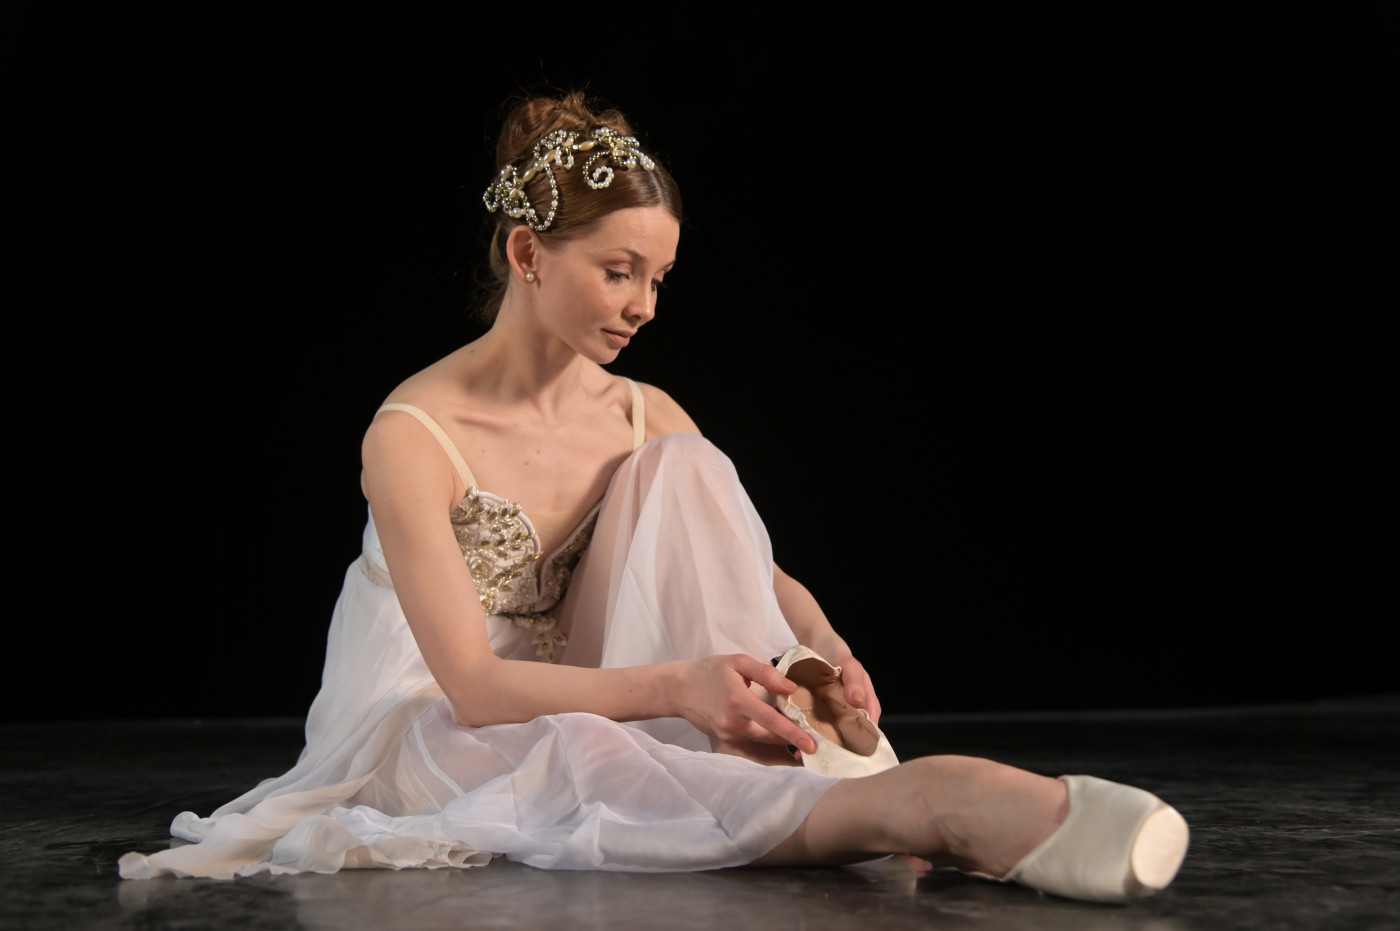 AN ICONIC POINTE SHOE BY SO DANÇA